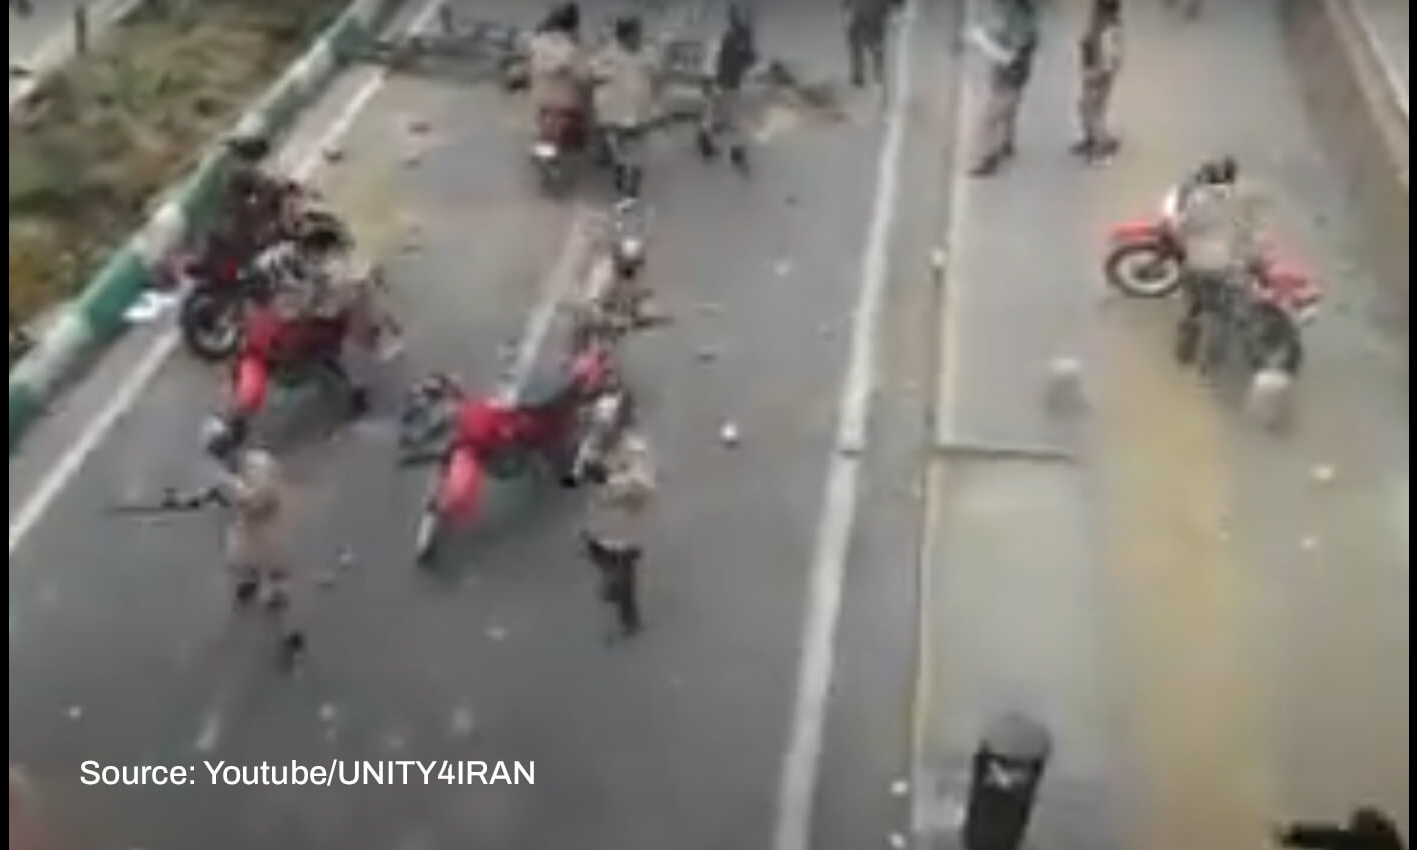 This video shows riot police clashing with protesters in Iran amid demonstrations over Mahsa Amini's death.